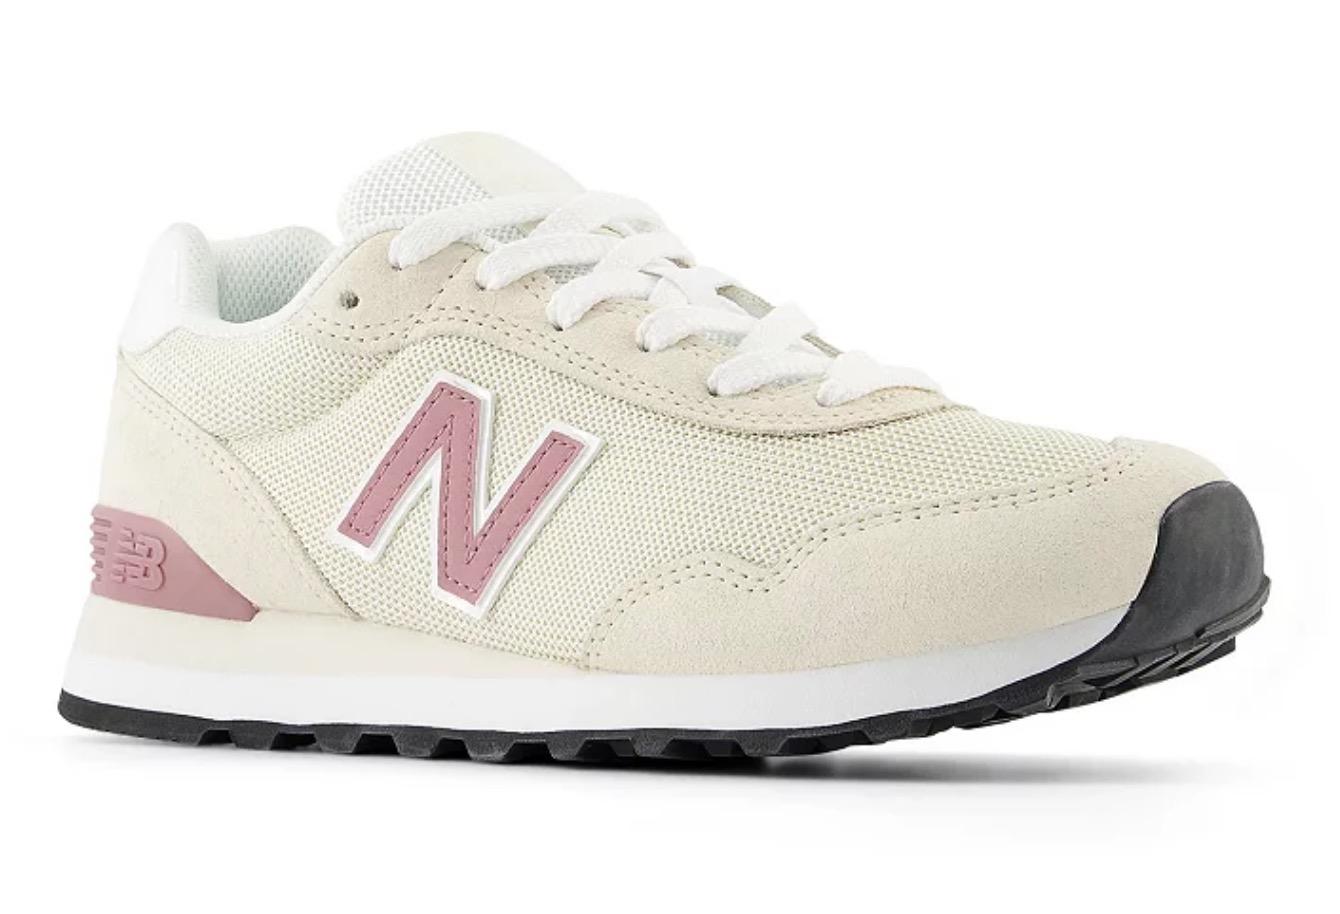 New Balance 515 V3 Classics Womens Shoes with $13 Kohls Credit for $56.24 Shipped